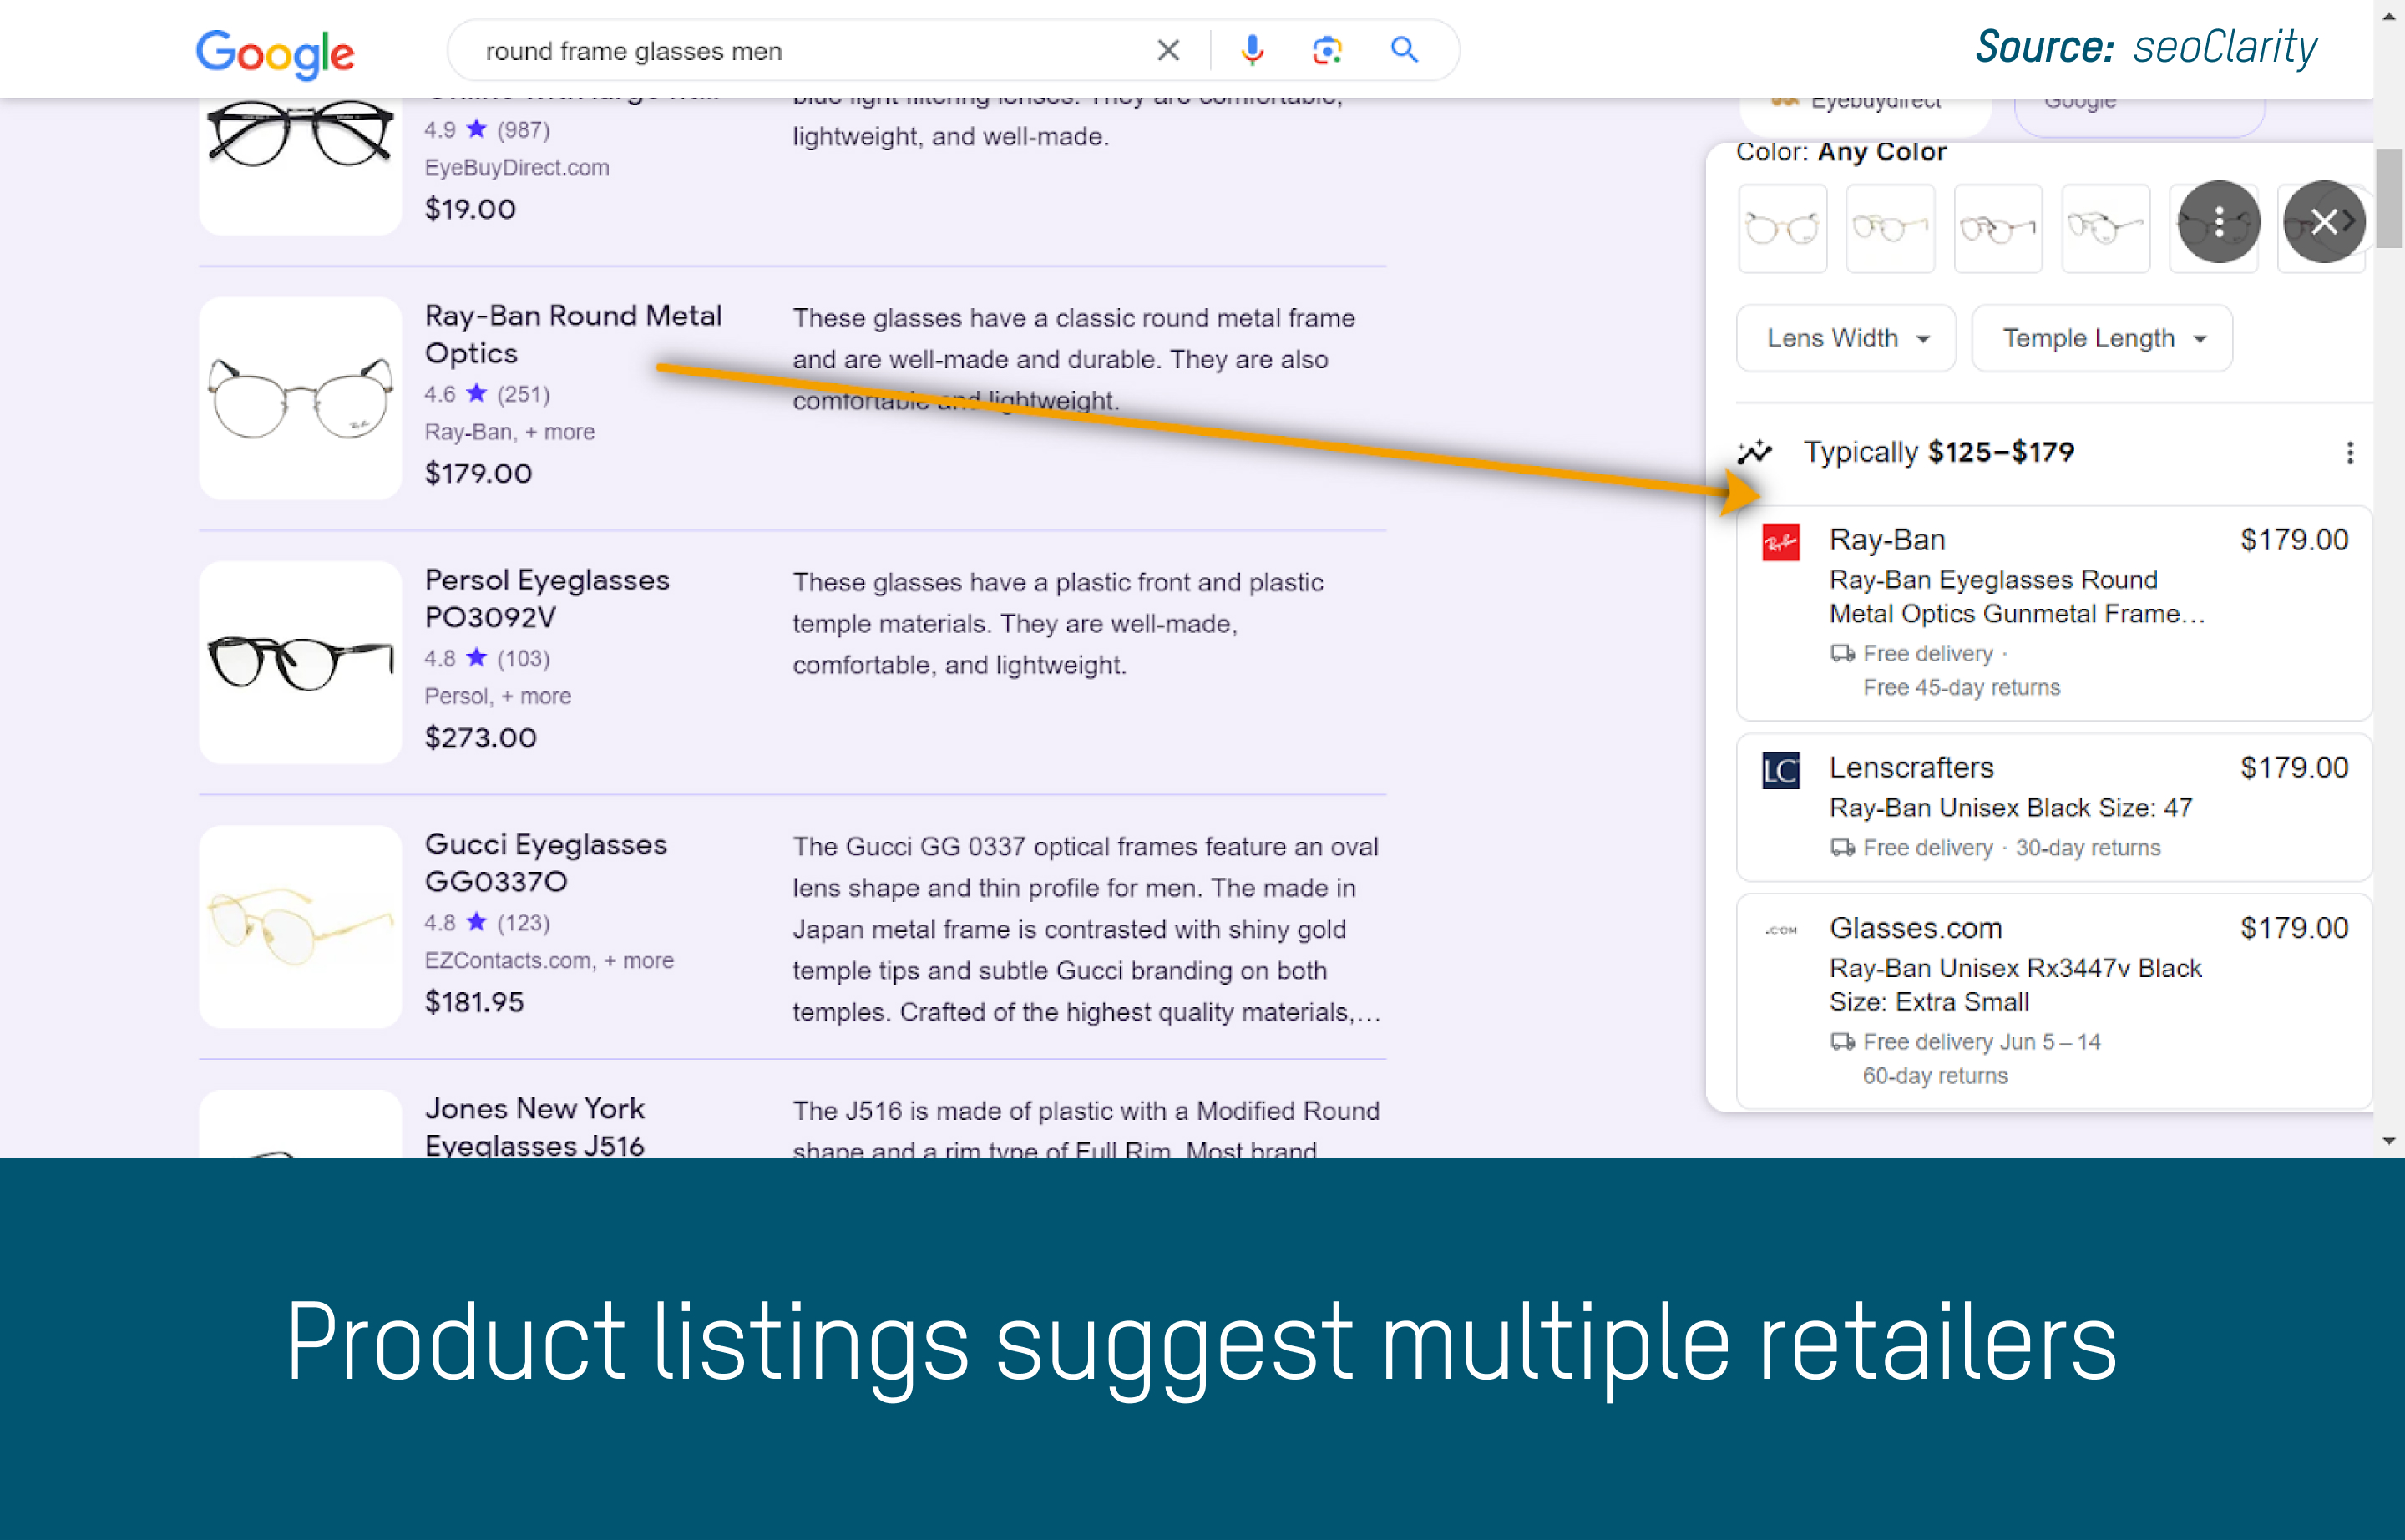 Product listings suggest multiple retailers